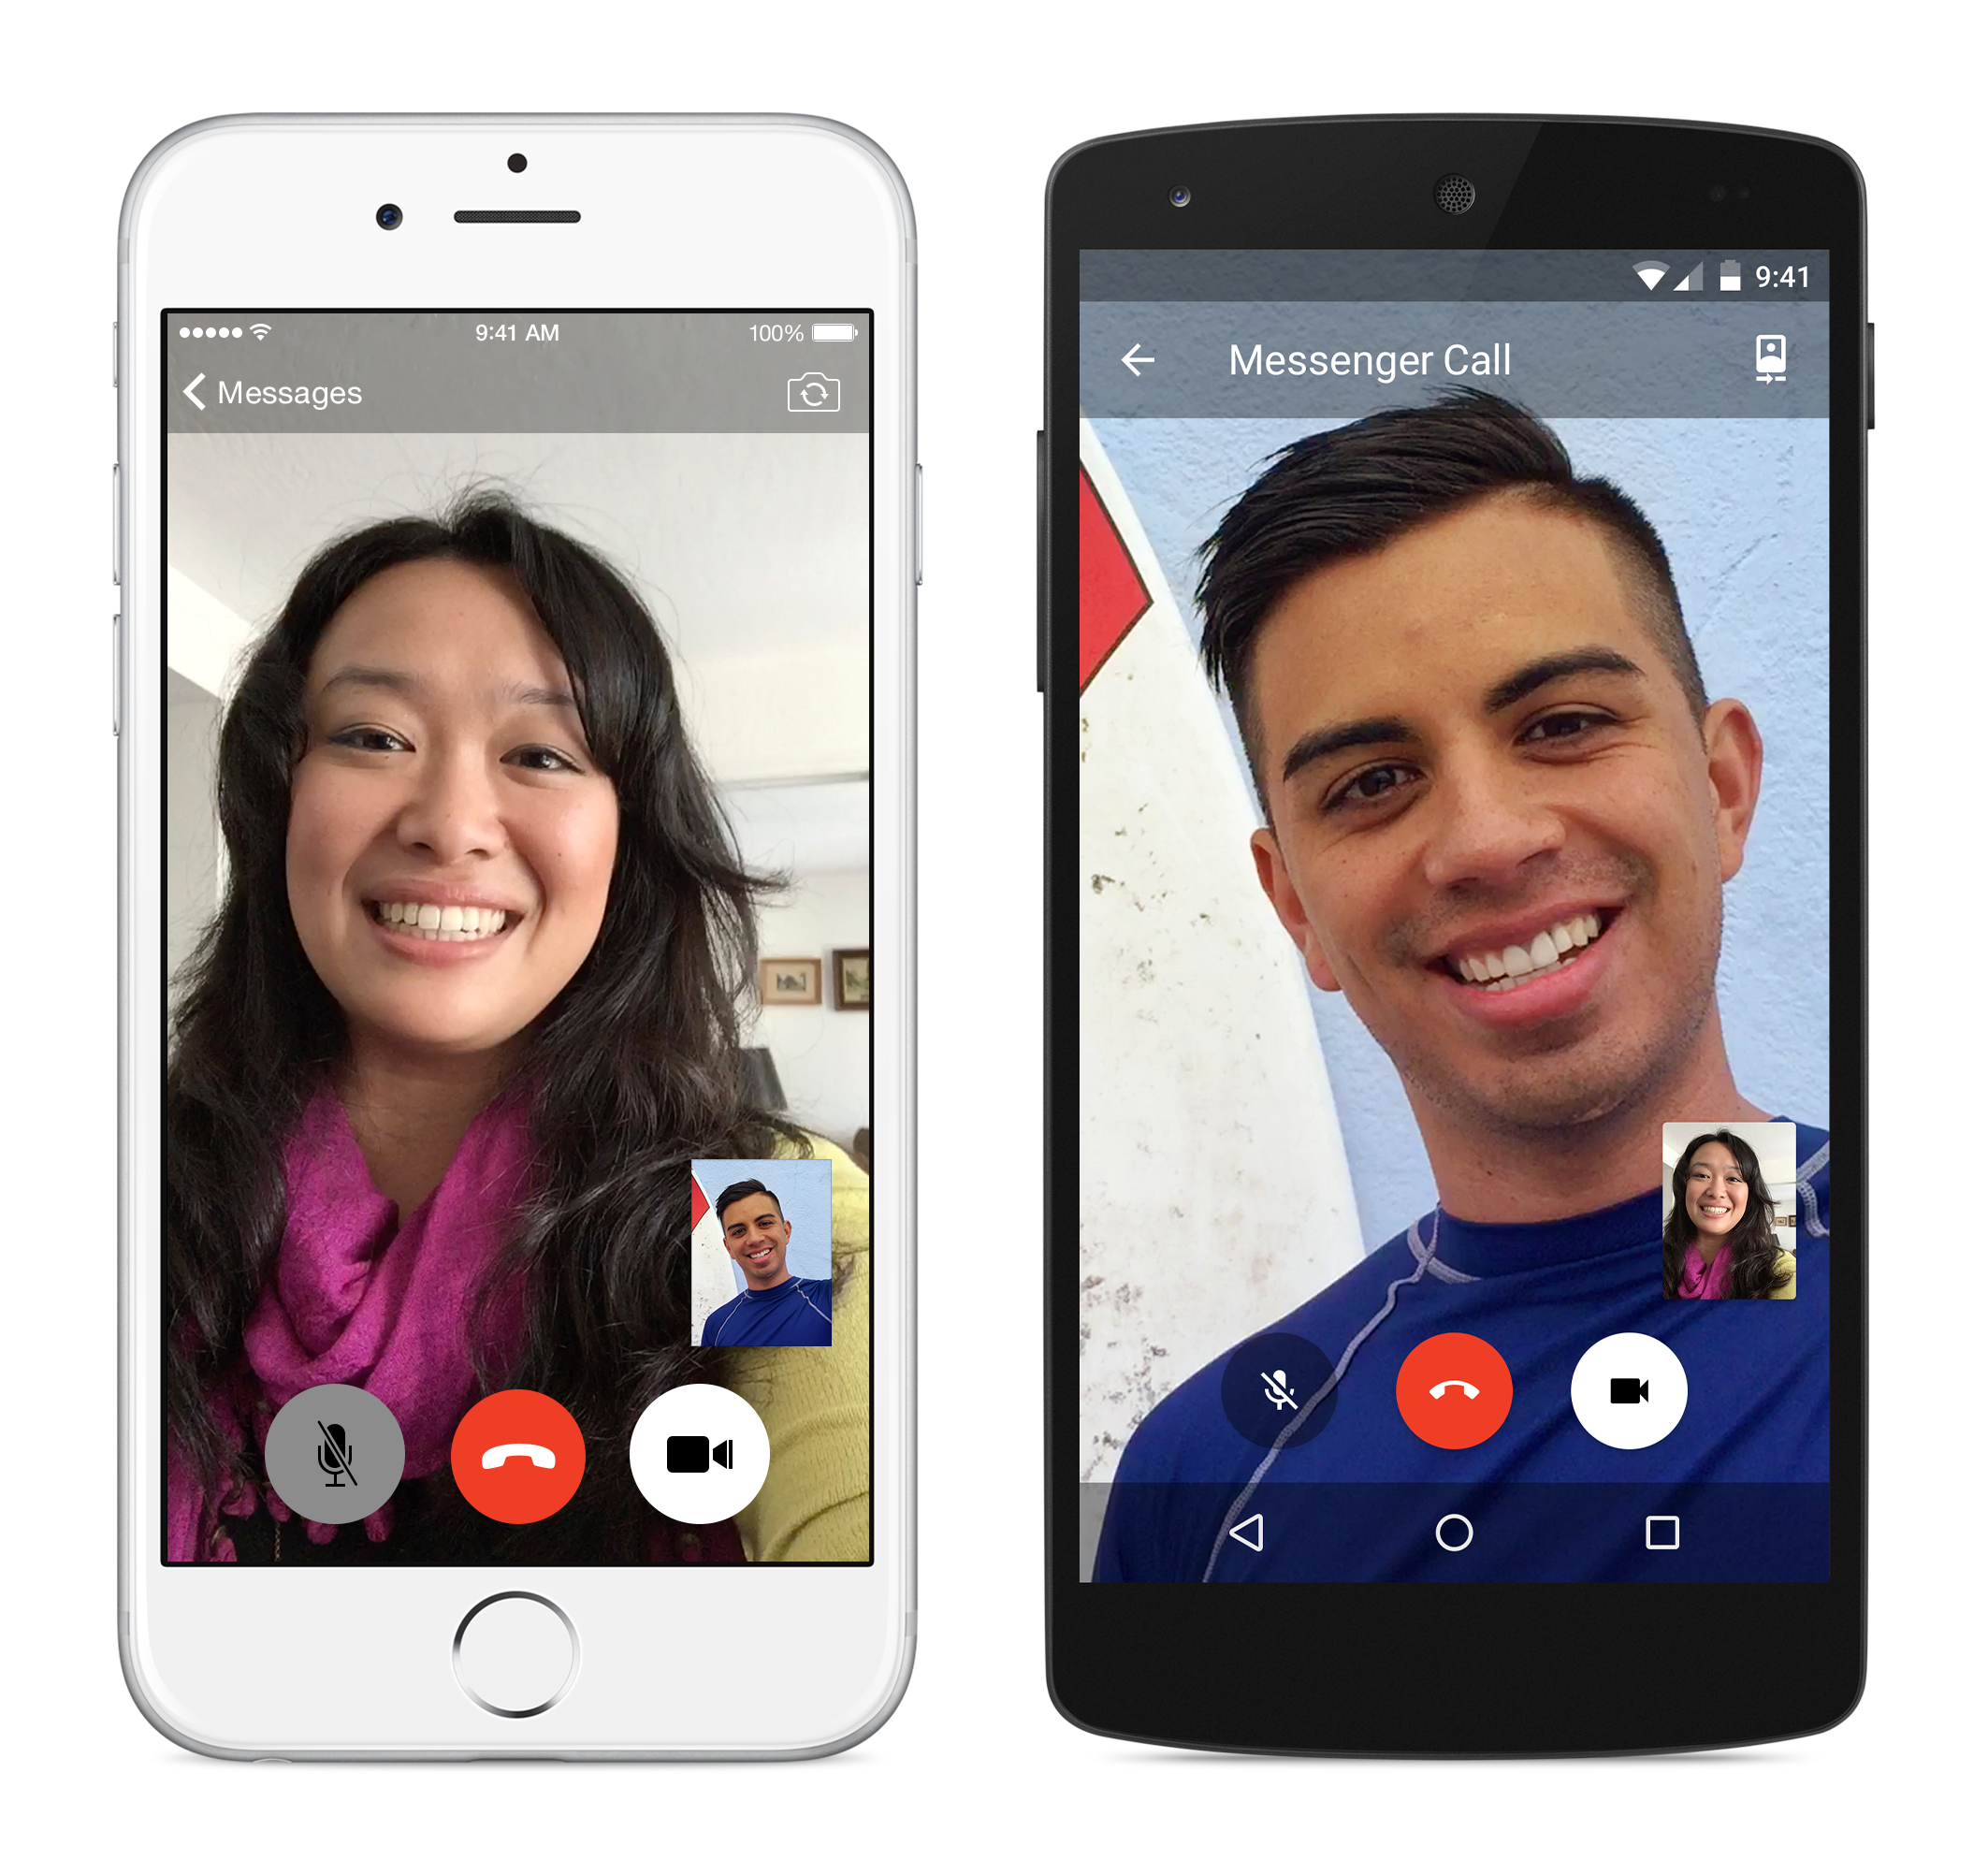 Facebook Messenger Adds Video Calling, Because Why Not